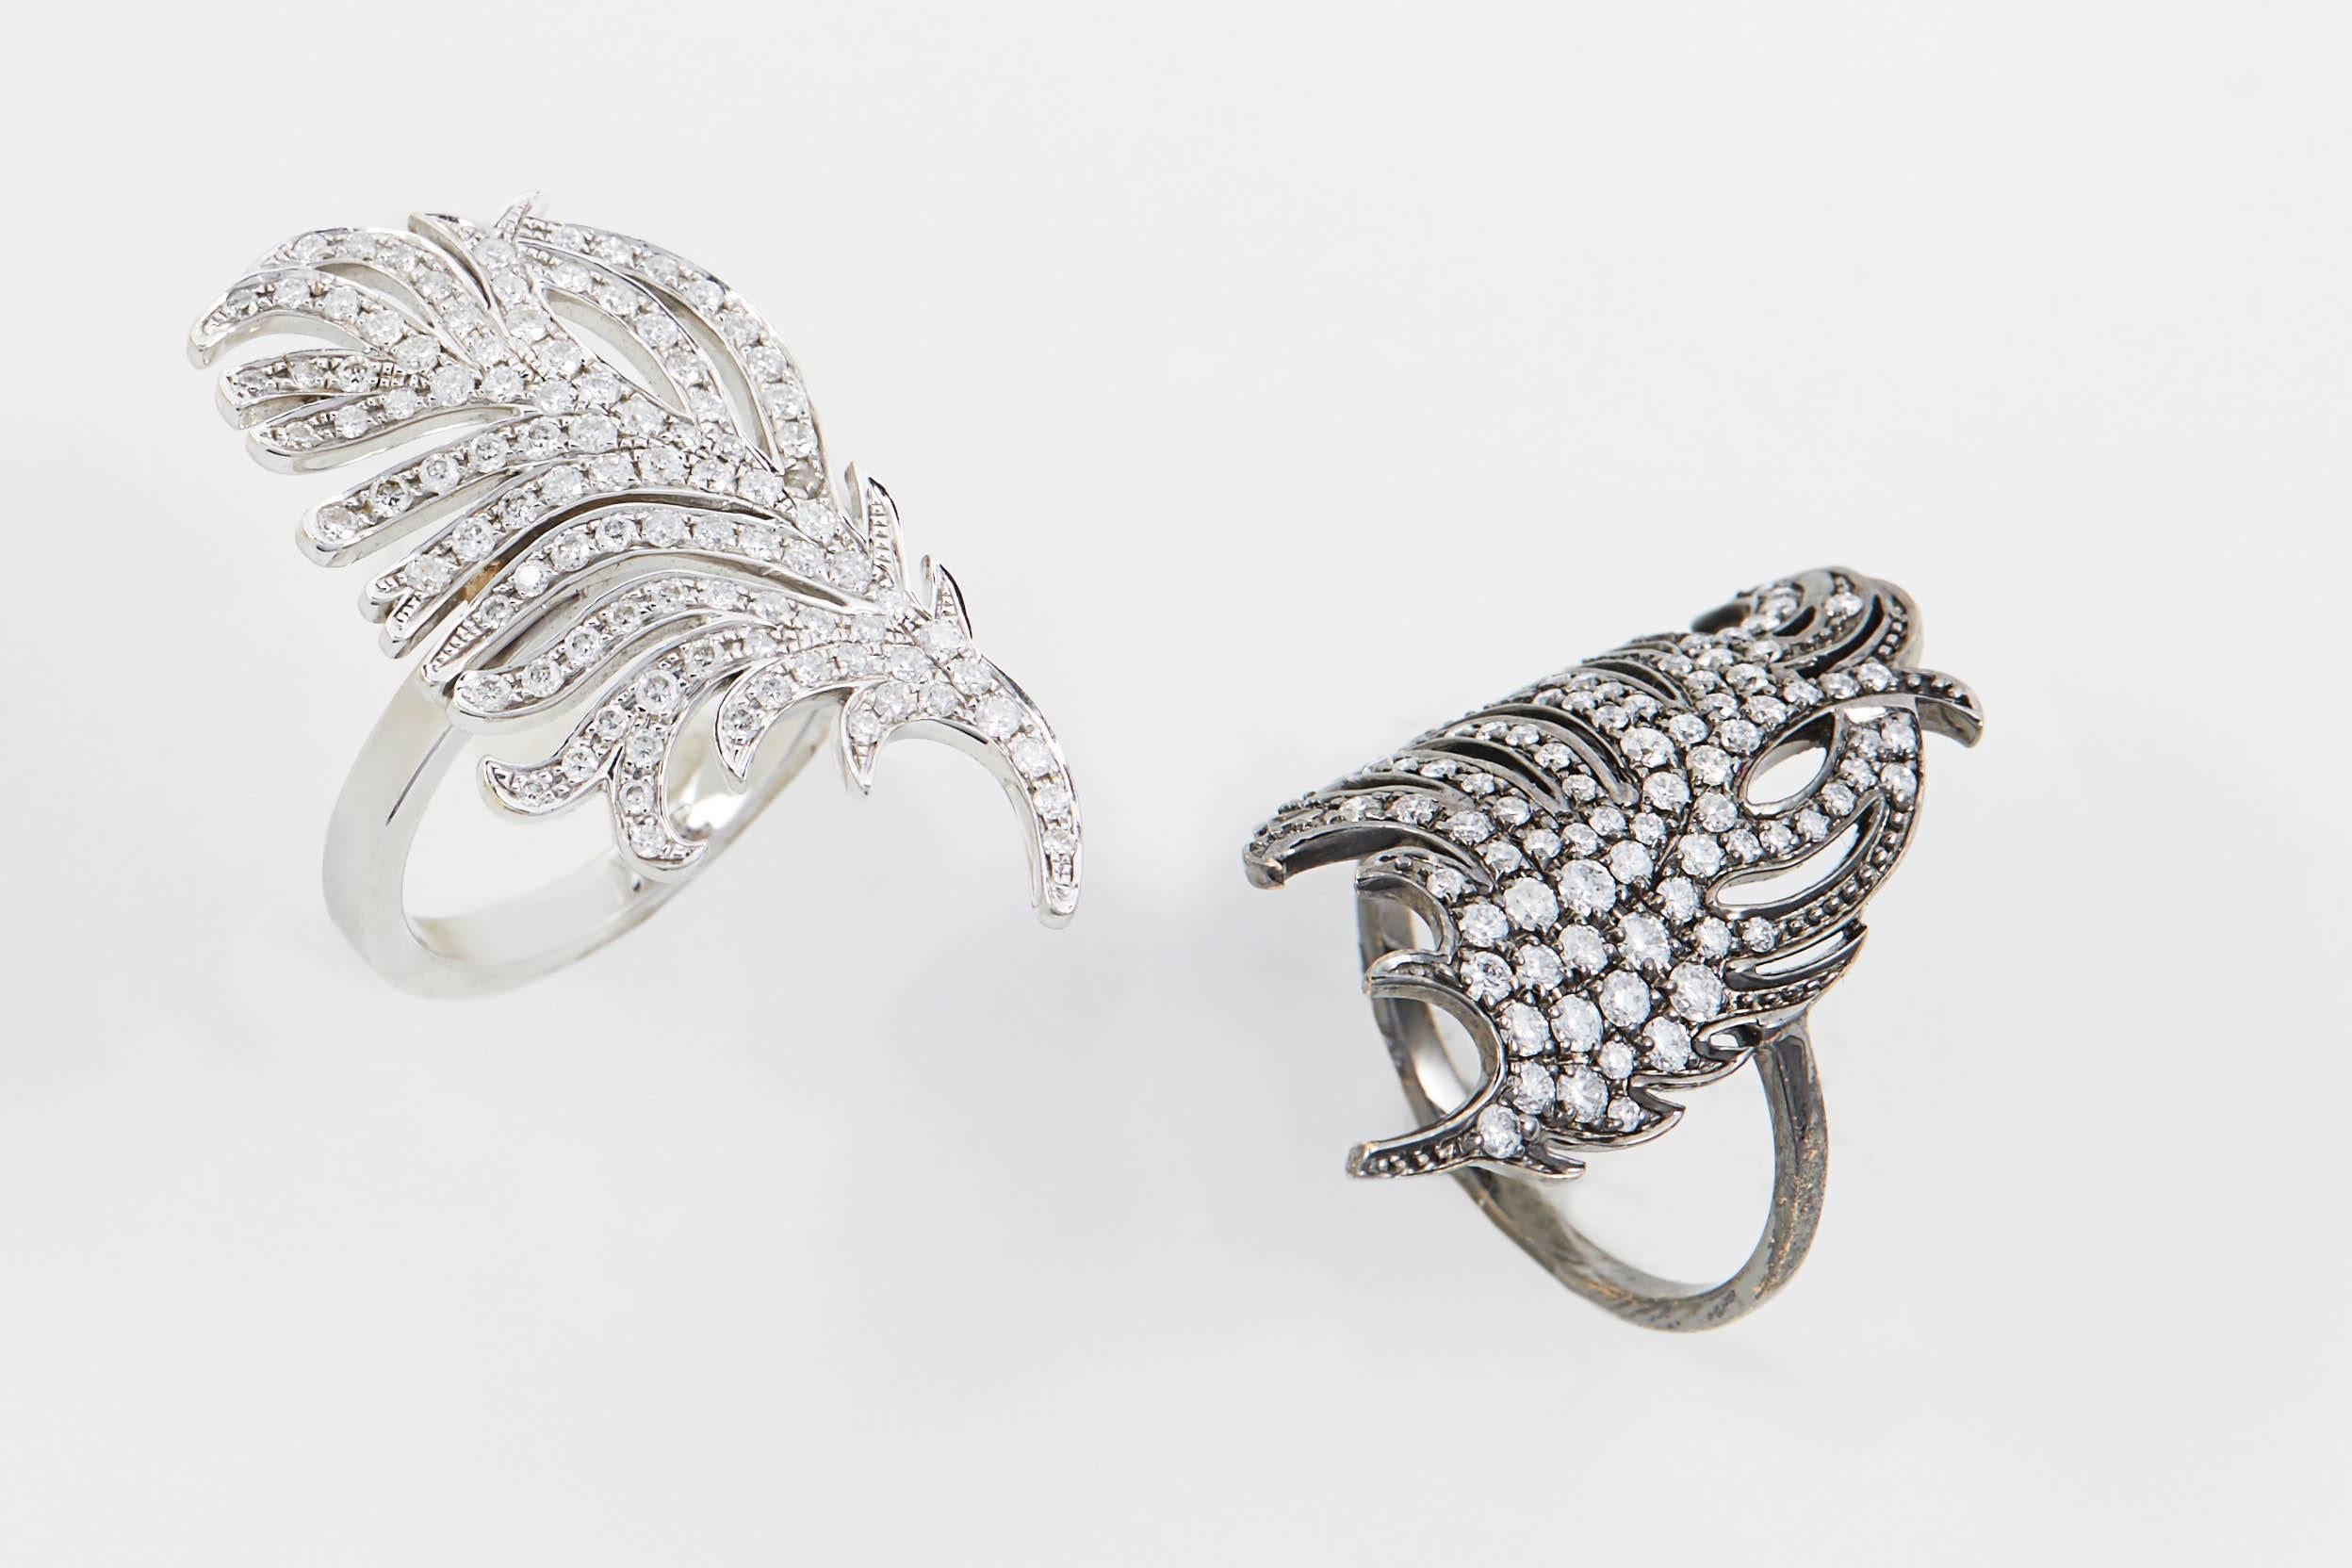 SAM.SAAB feather motif ring in 18k white gold and 1.0ct black diamonds. Size 4 to be worn mid finger. Re-sizable